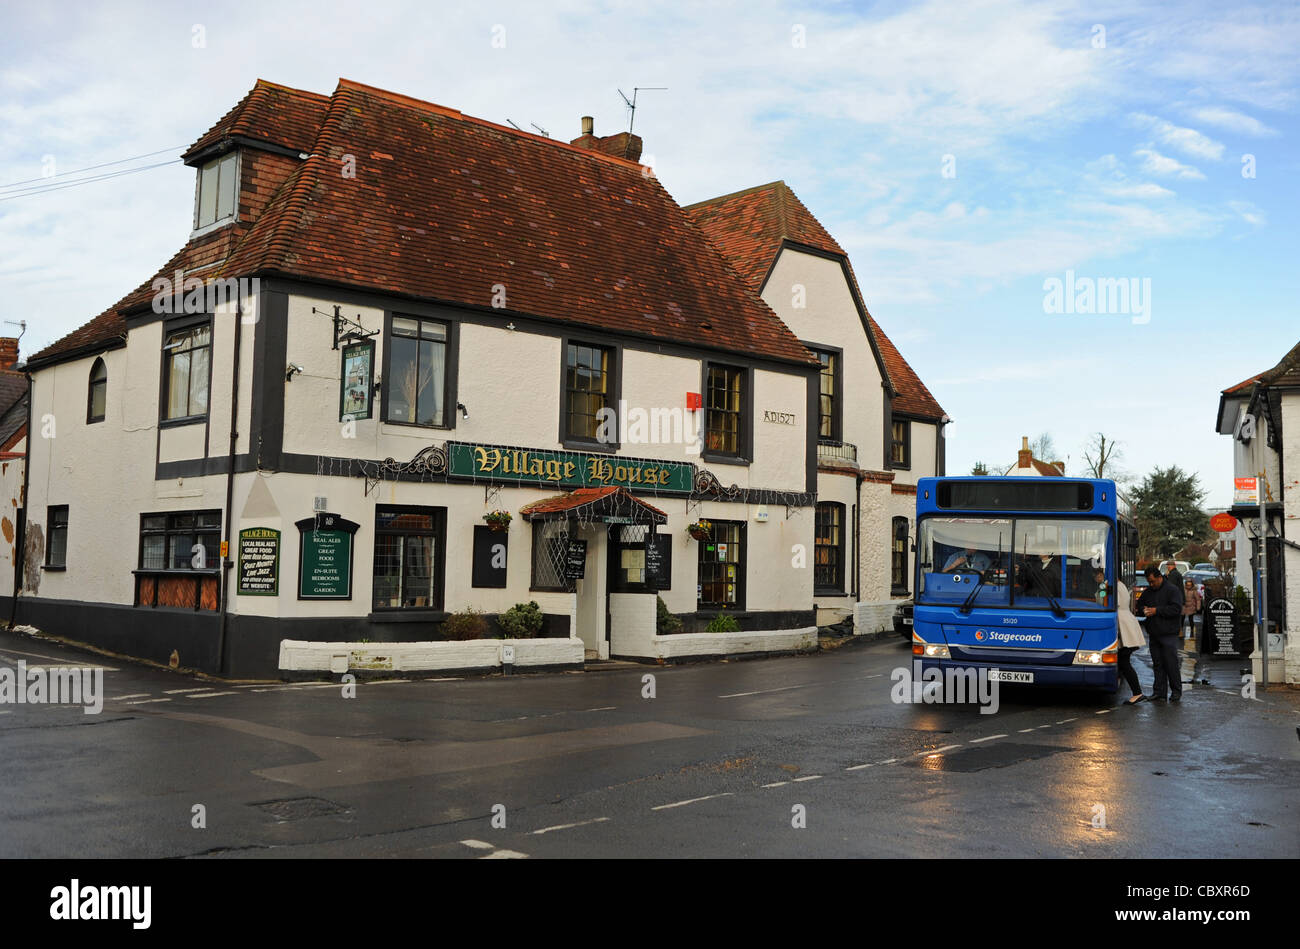 Stagecoach bus service stopping at Findon village West Sussex UK Photograph taken 23 December 2011 Stock Photo